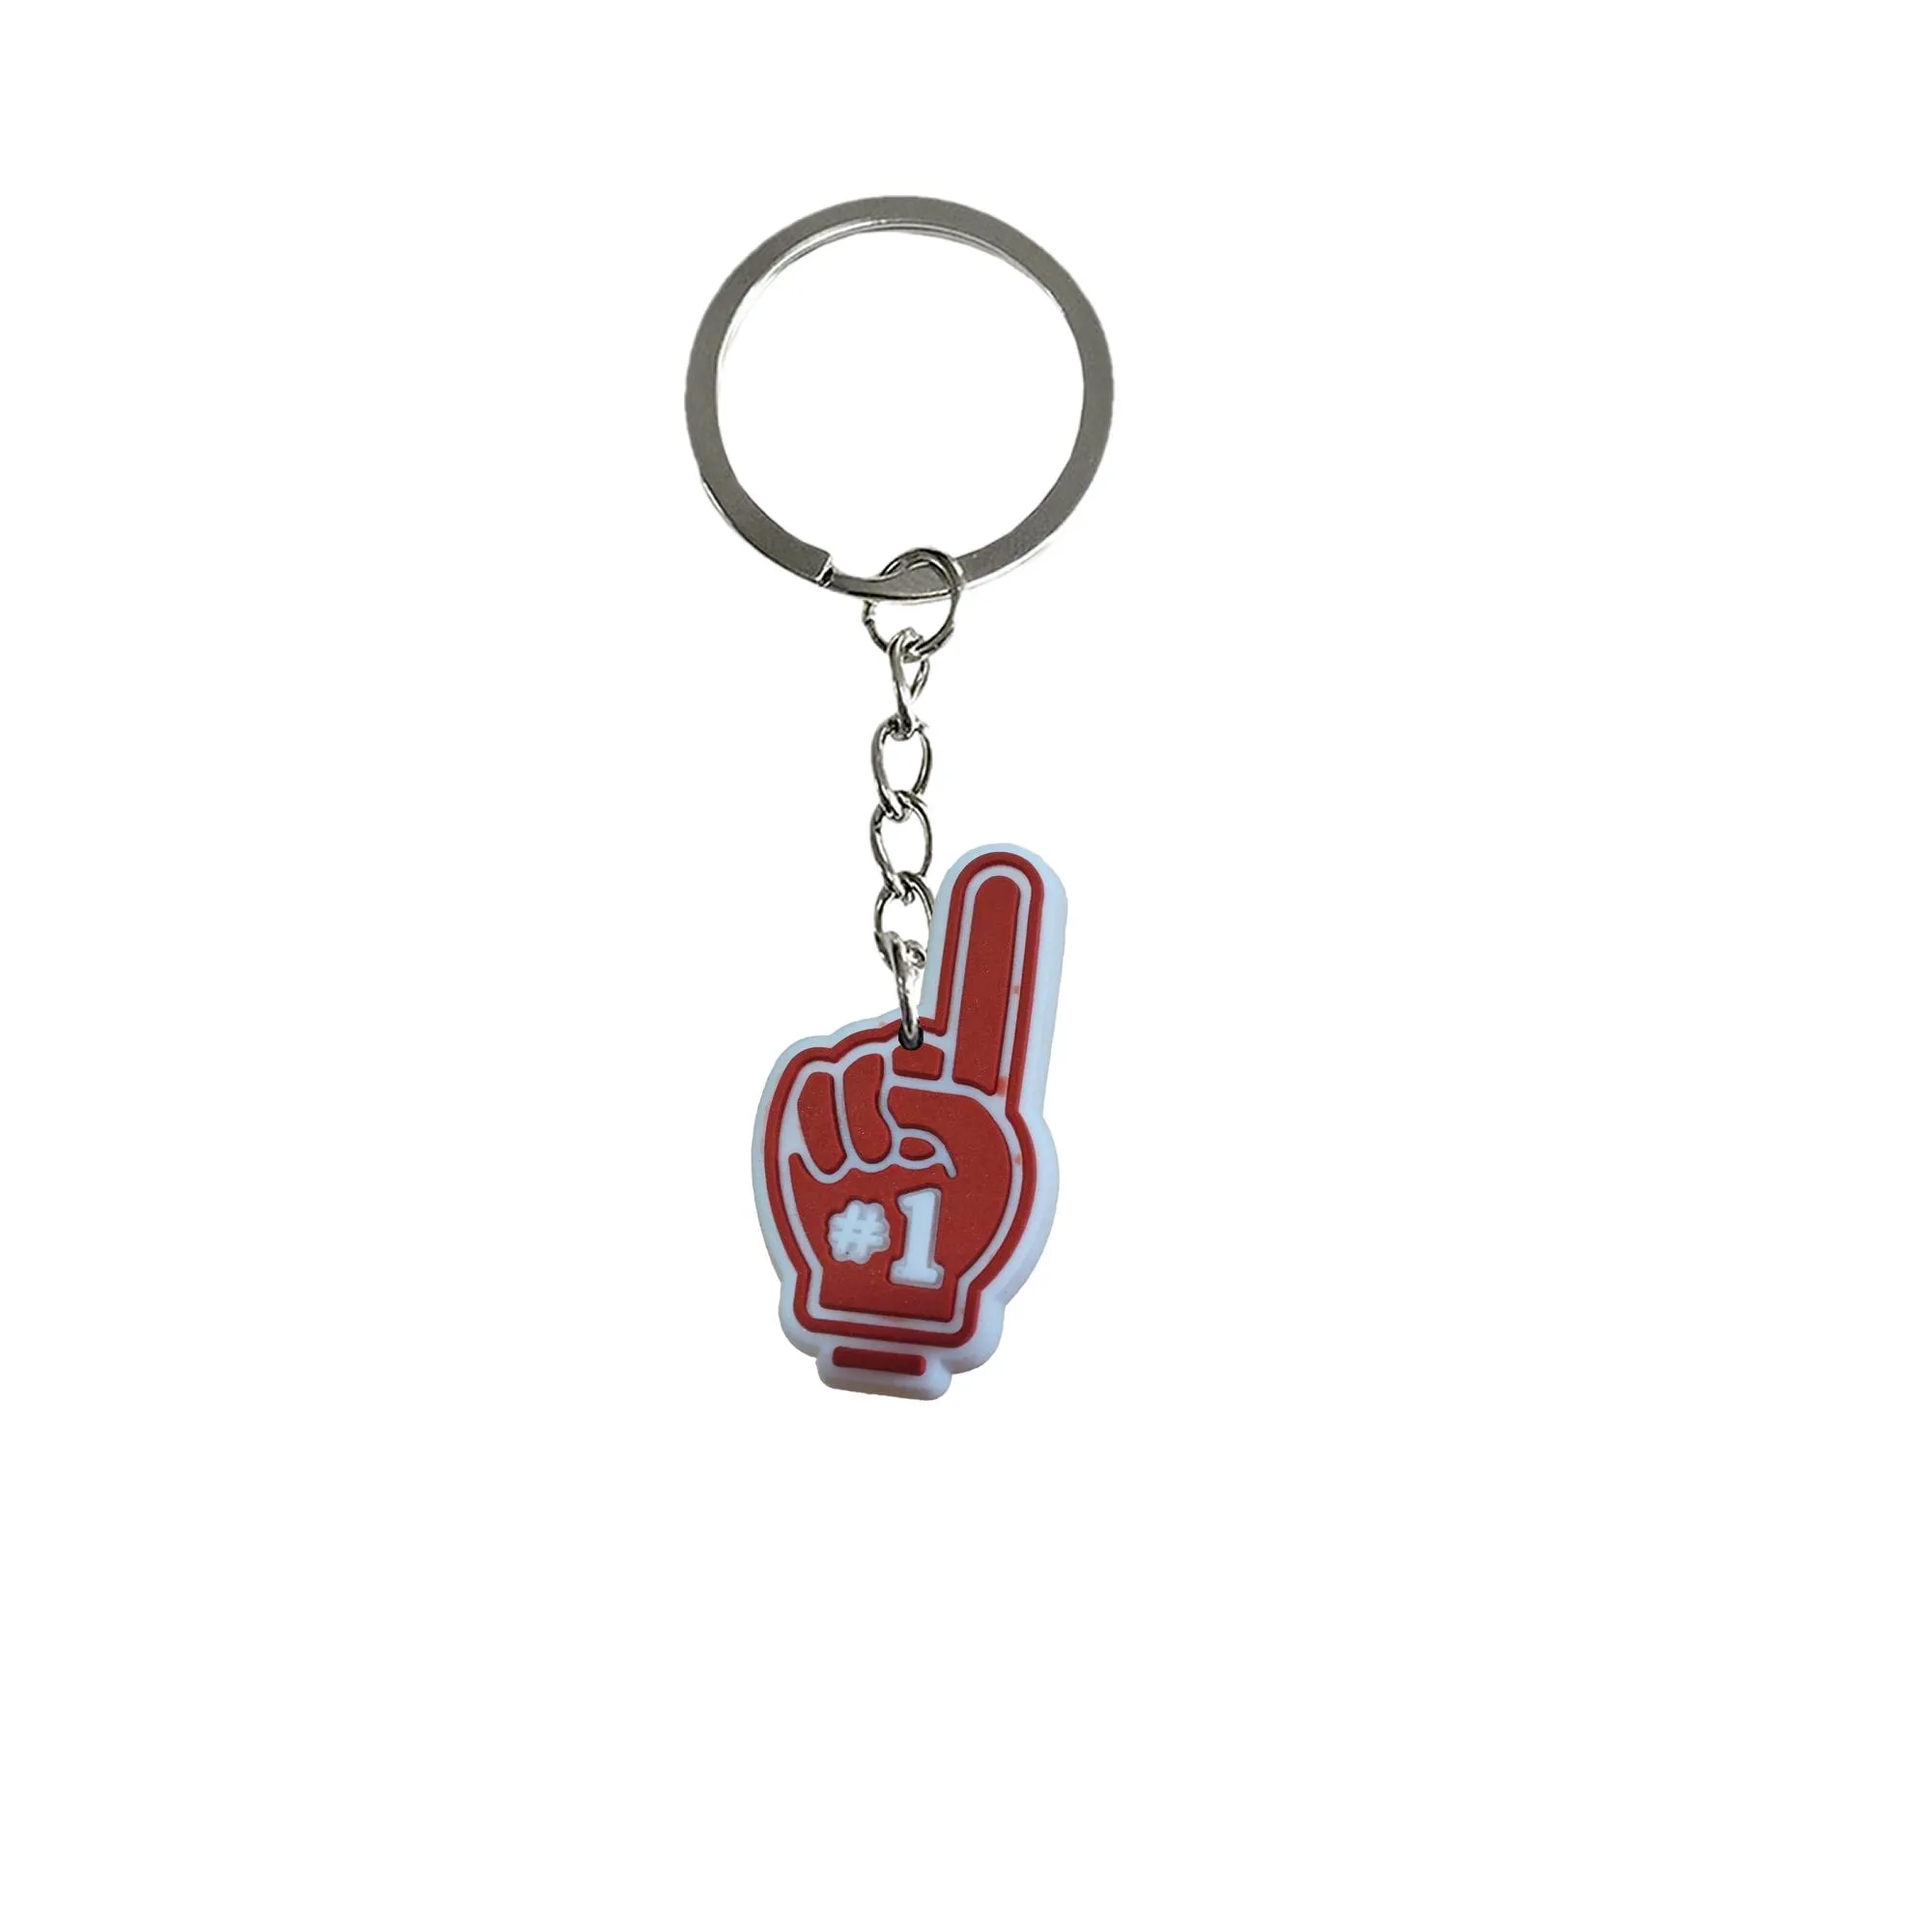 rugby 13 keychain goodie bag stuffers supplies key rings for classroom prizes keyring suitable schoolbag keyrings bags kids party favors keychains men